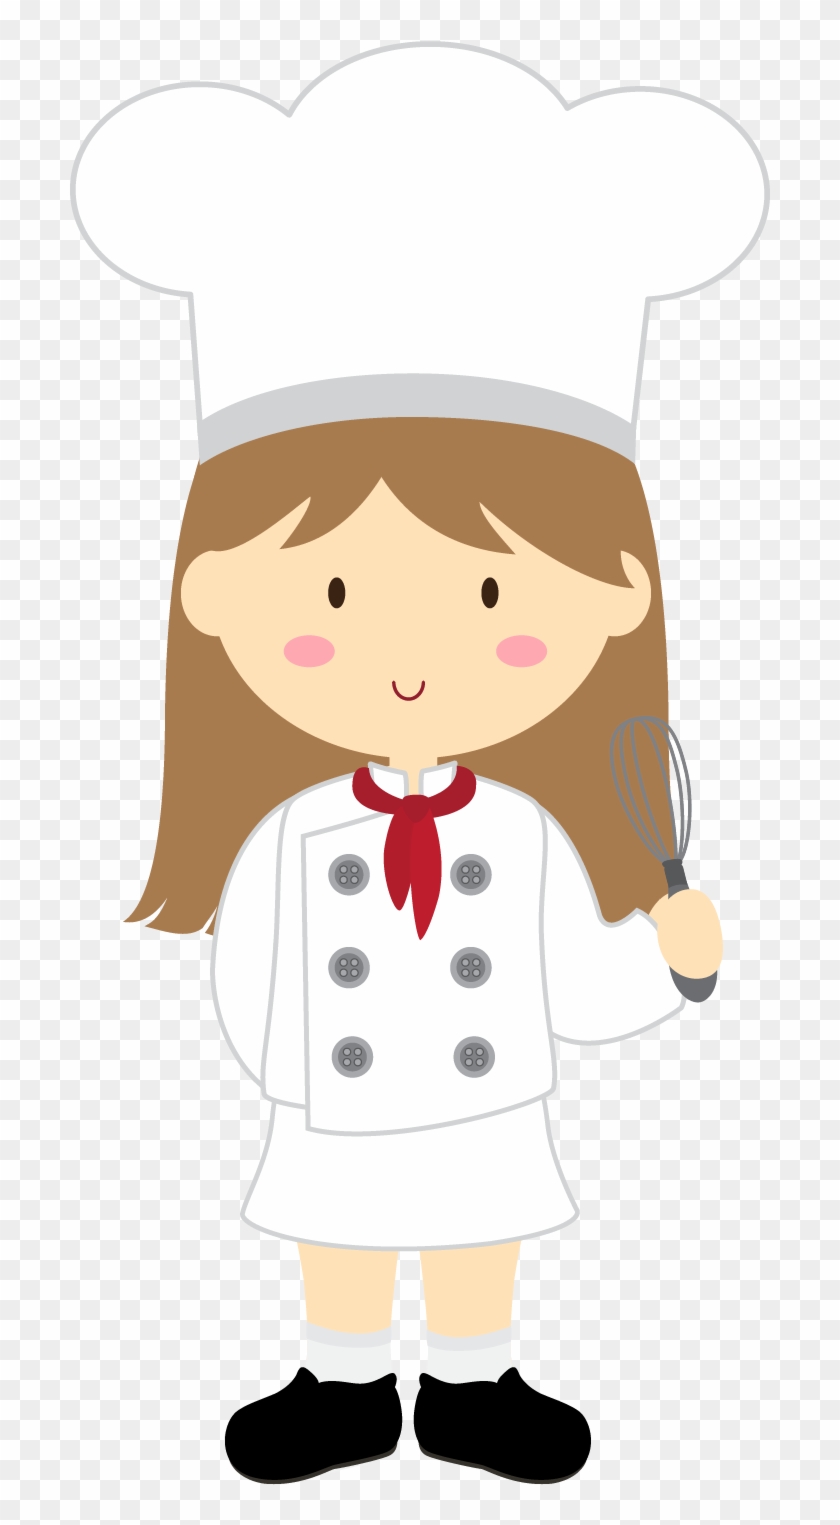 Download Kitchen Clipart Chefs Clip Art Cookbook Ideas Searching Chef Clip Art Girl Free Transparent Png Clipart Images Download